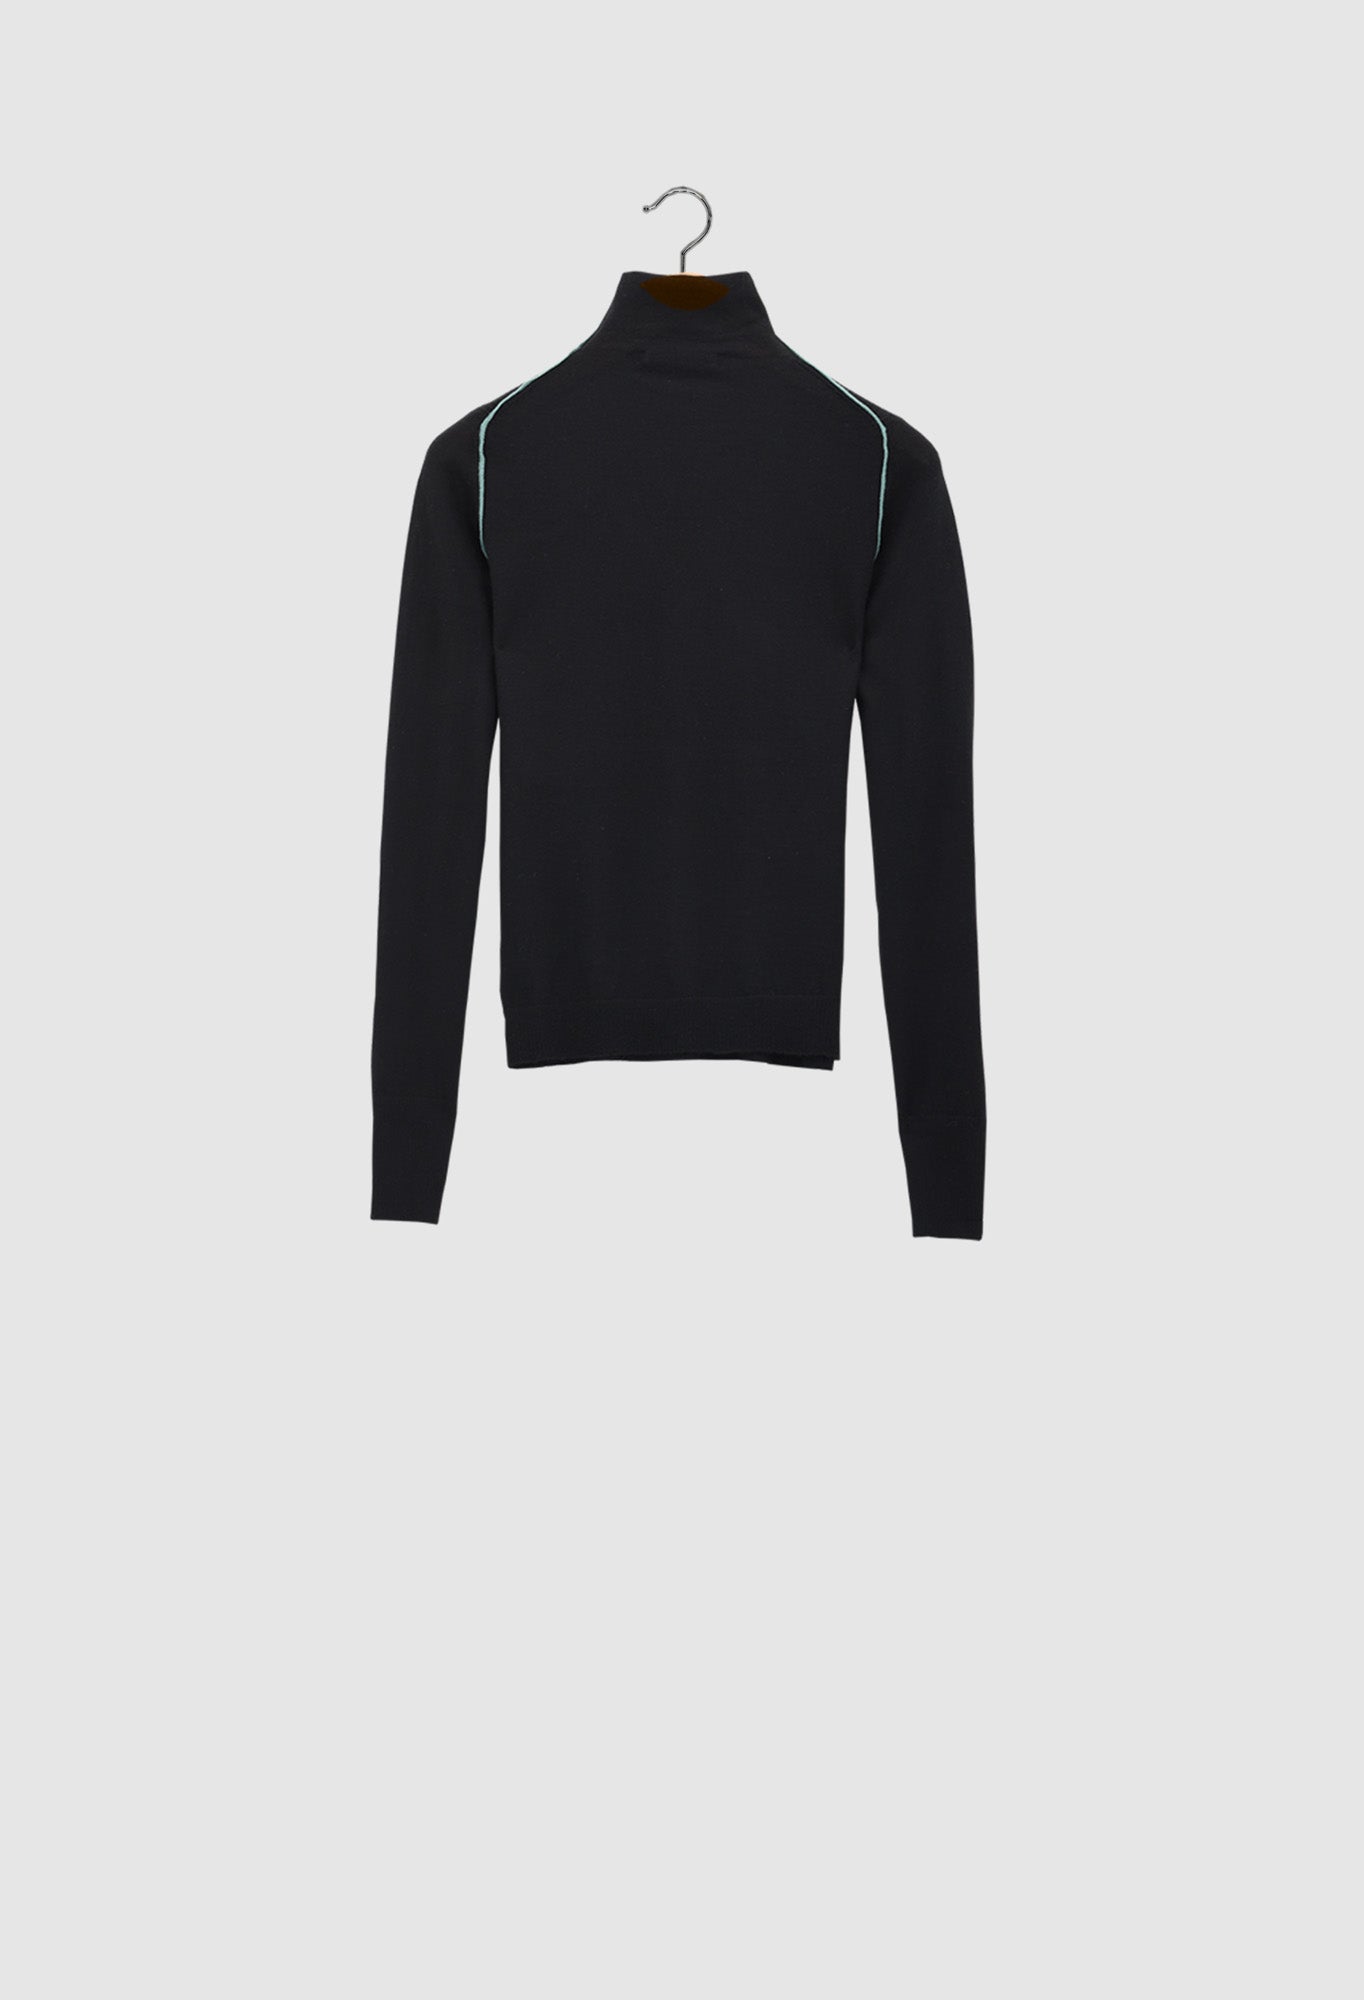 WARA - 16gg Cashmere Turtleneck Sweater in Black and Teal